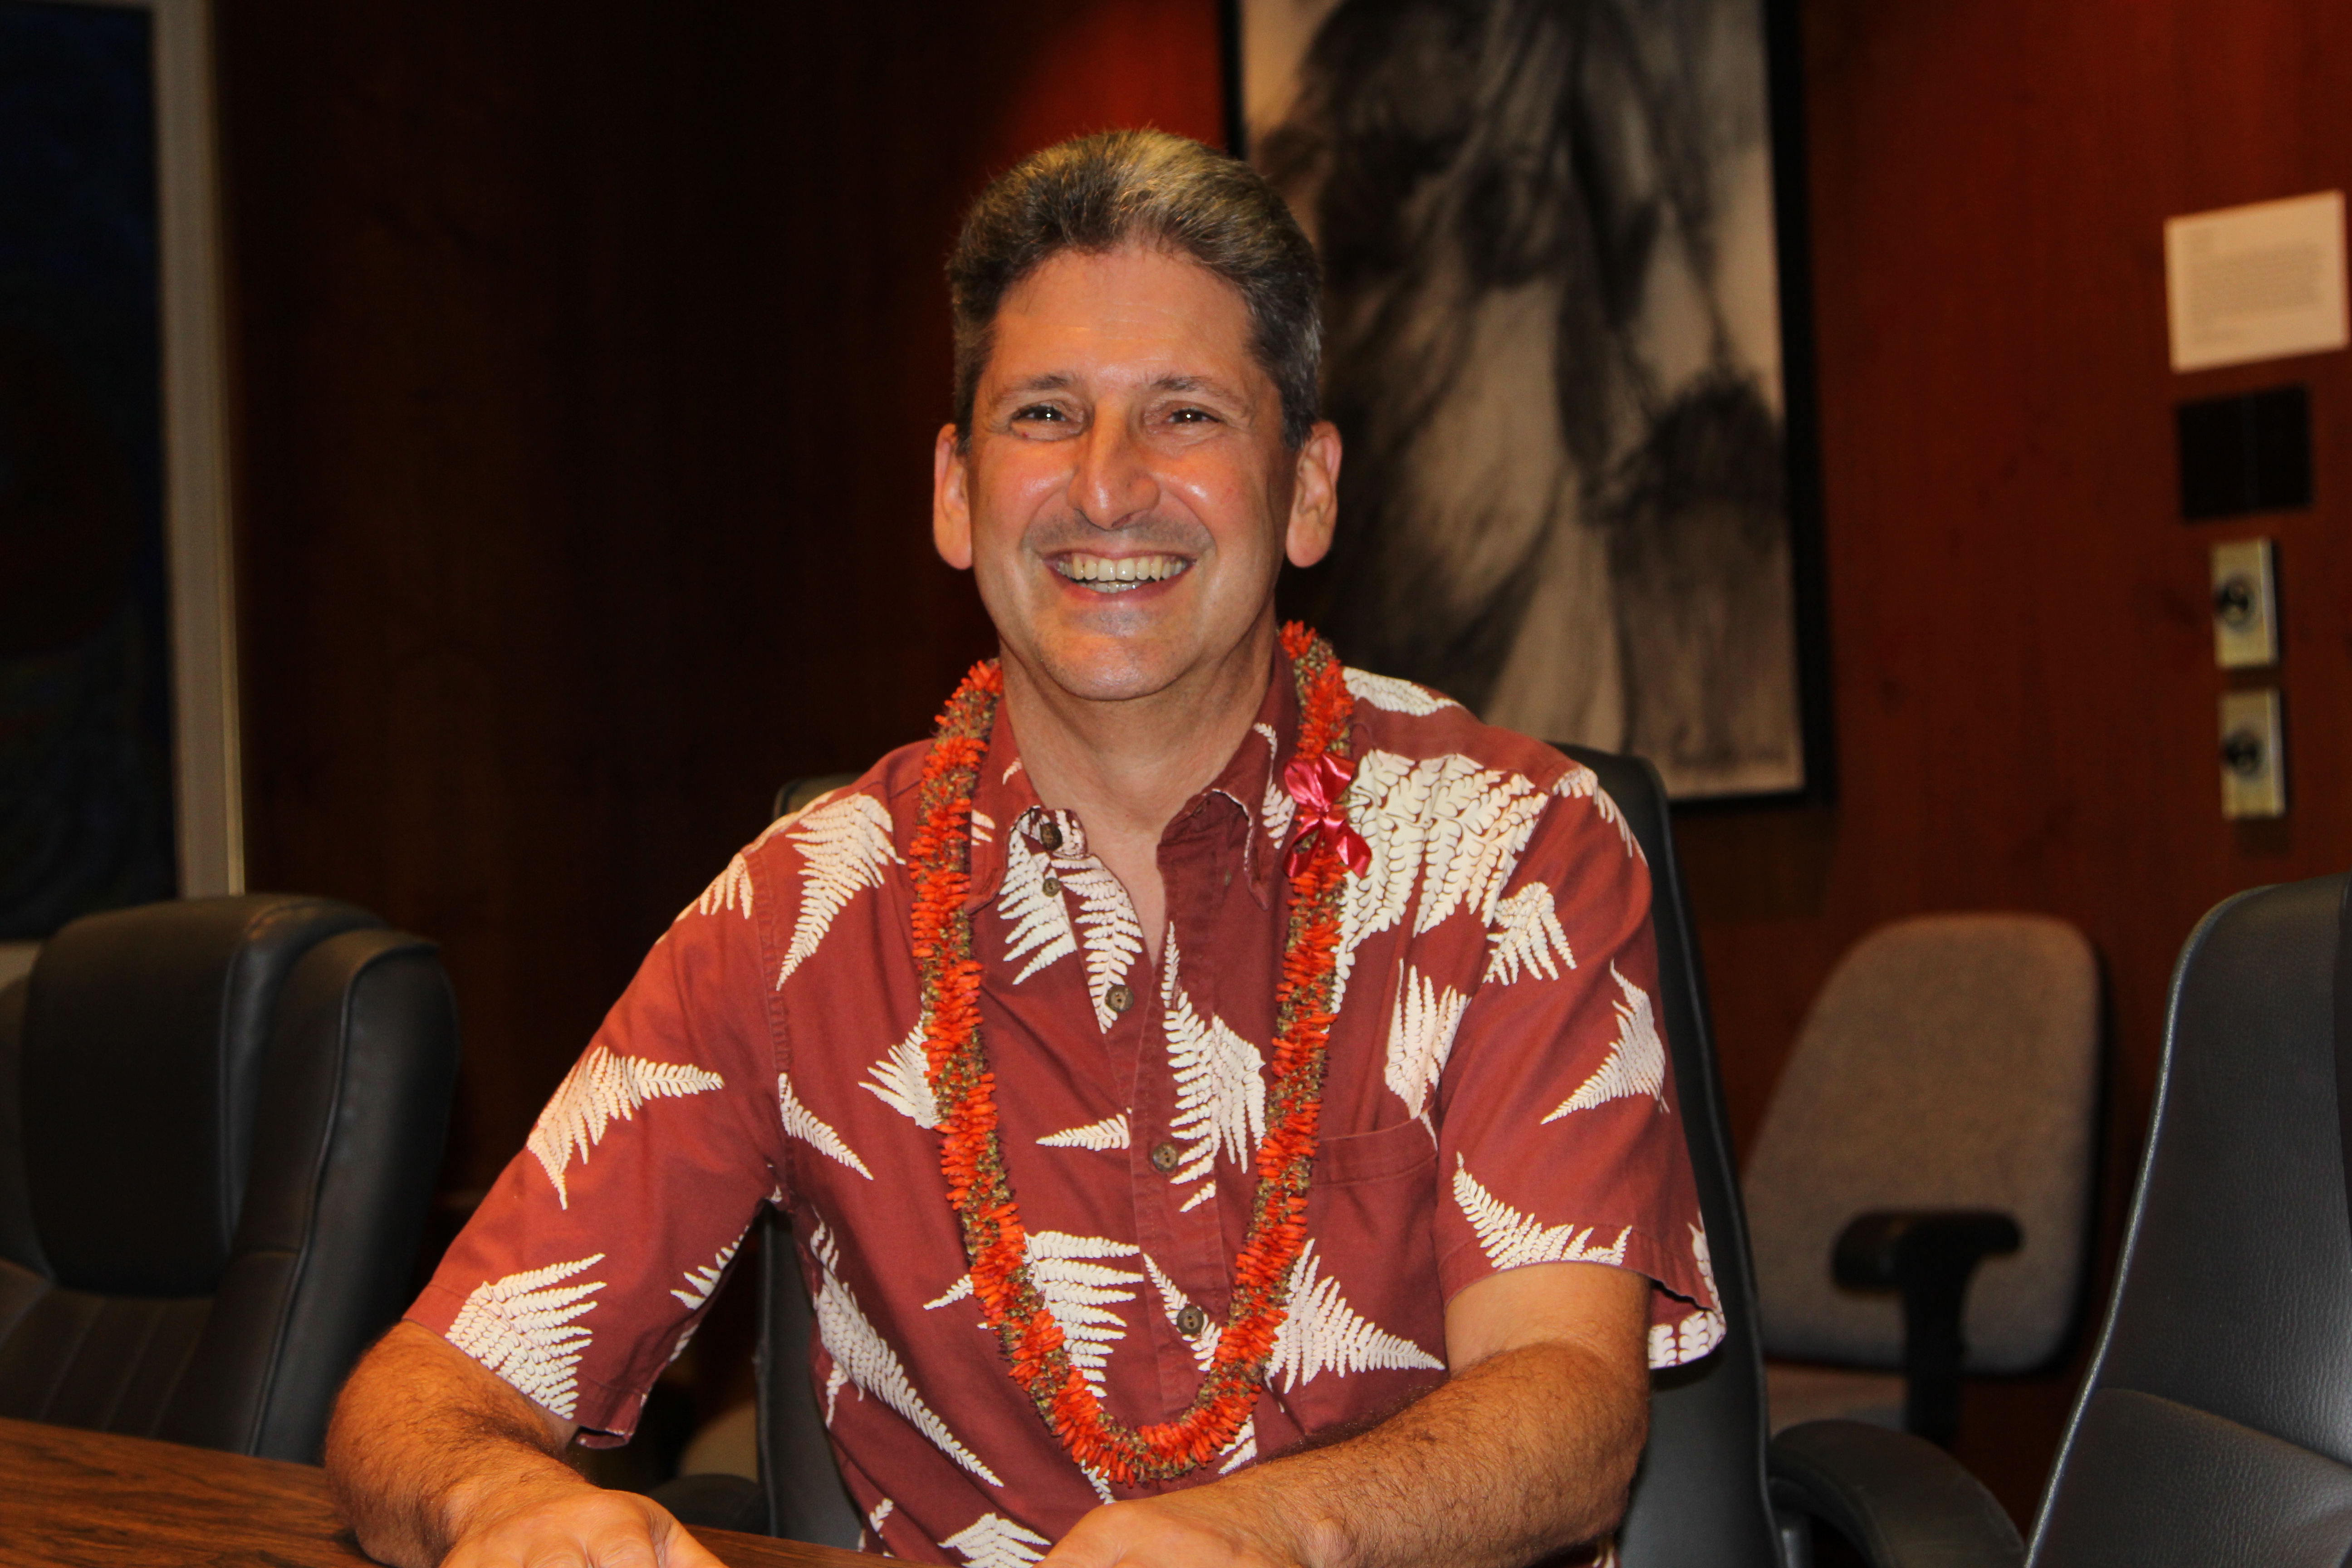 Lassner sees ‘unique opportunity’ in UH system